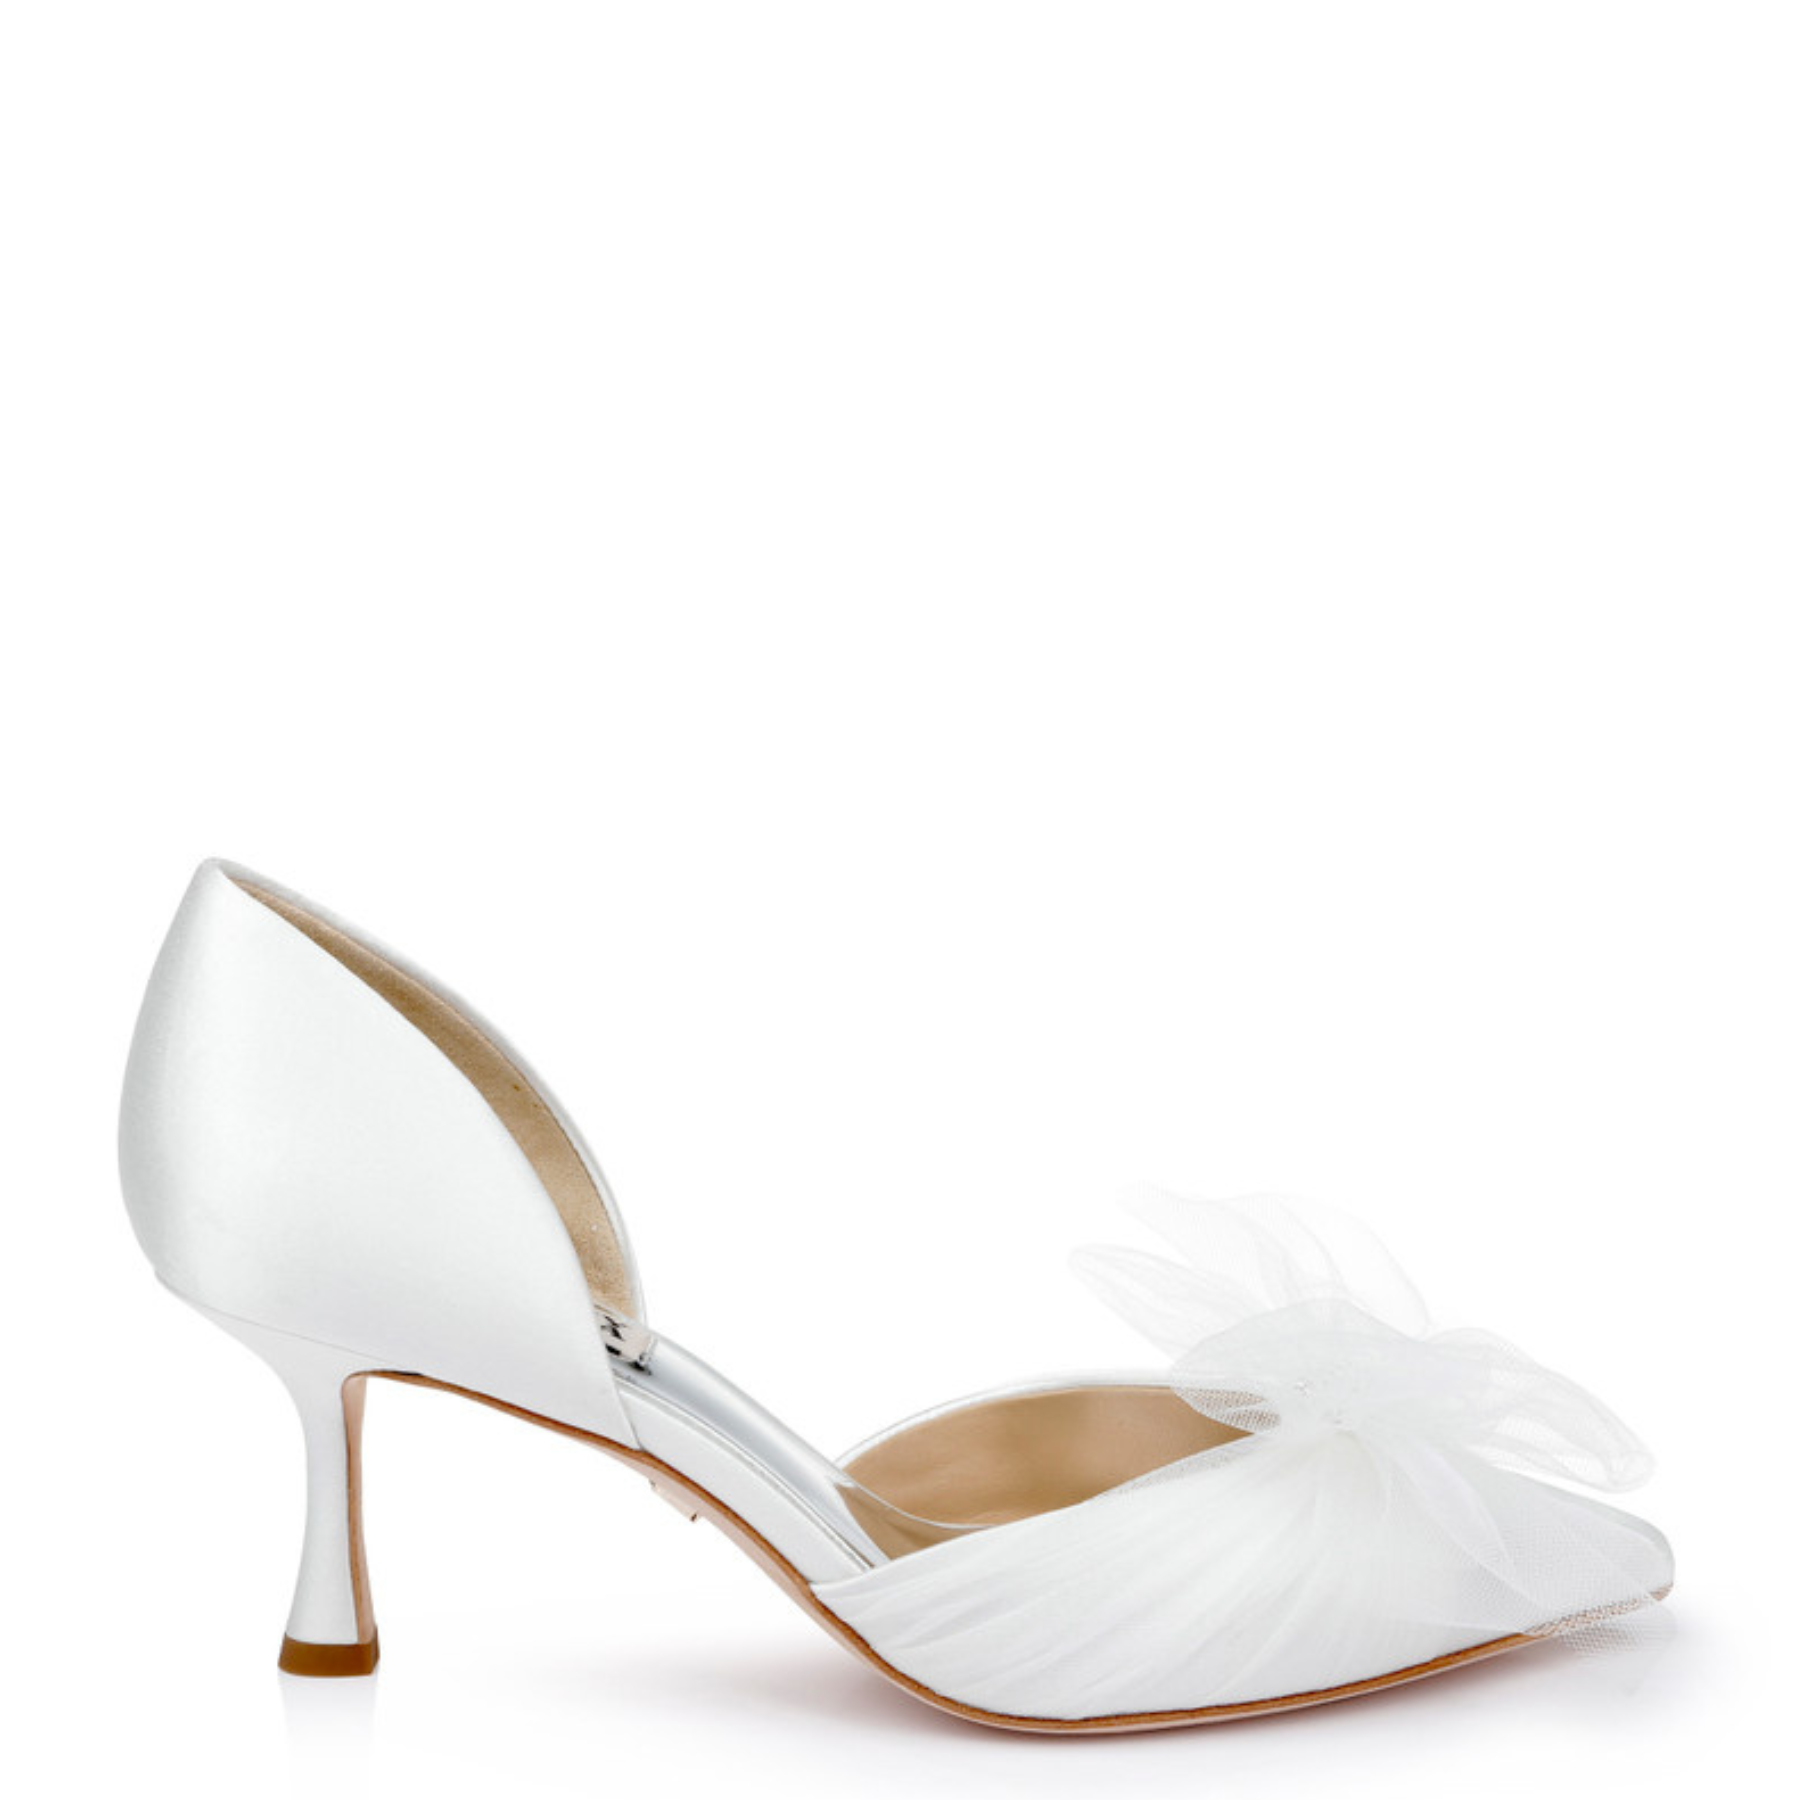 Festive - Pointed Toe Stiletto Bridal Pump With Tulle Bow - White